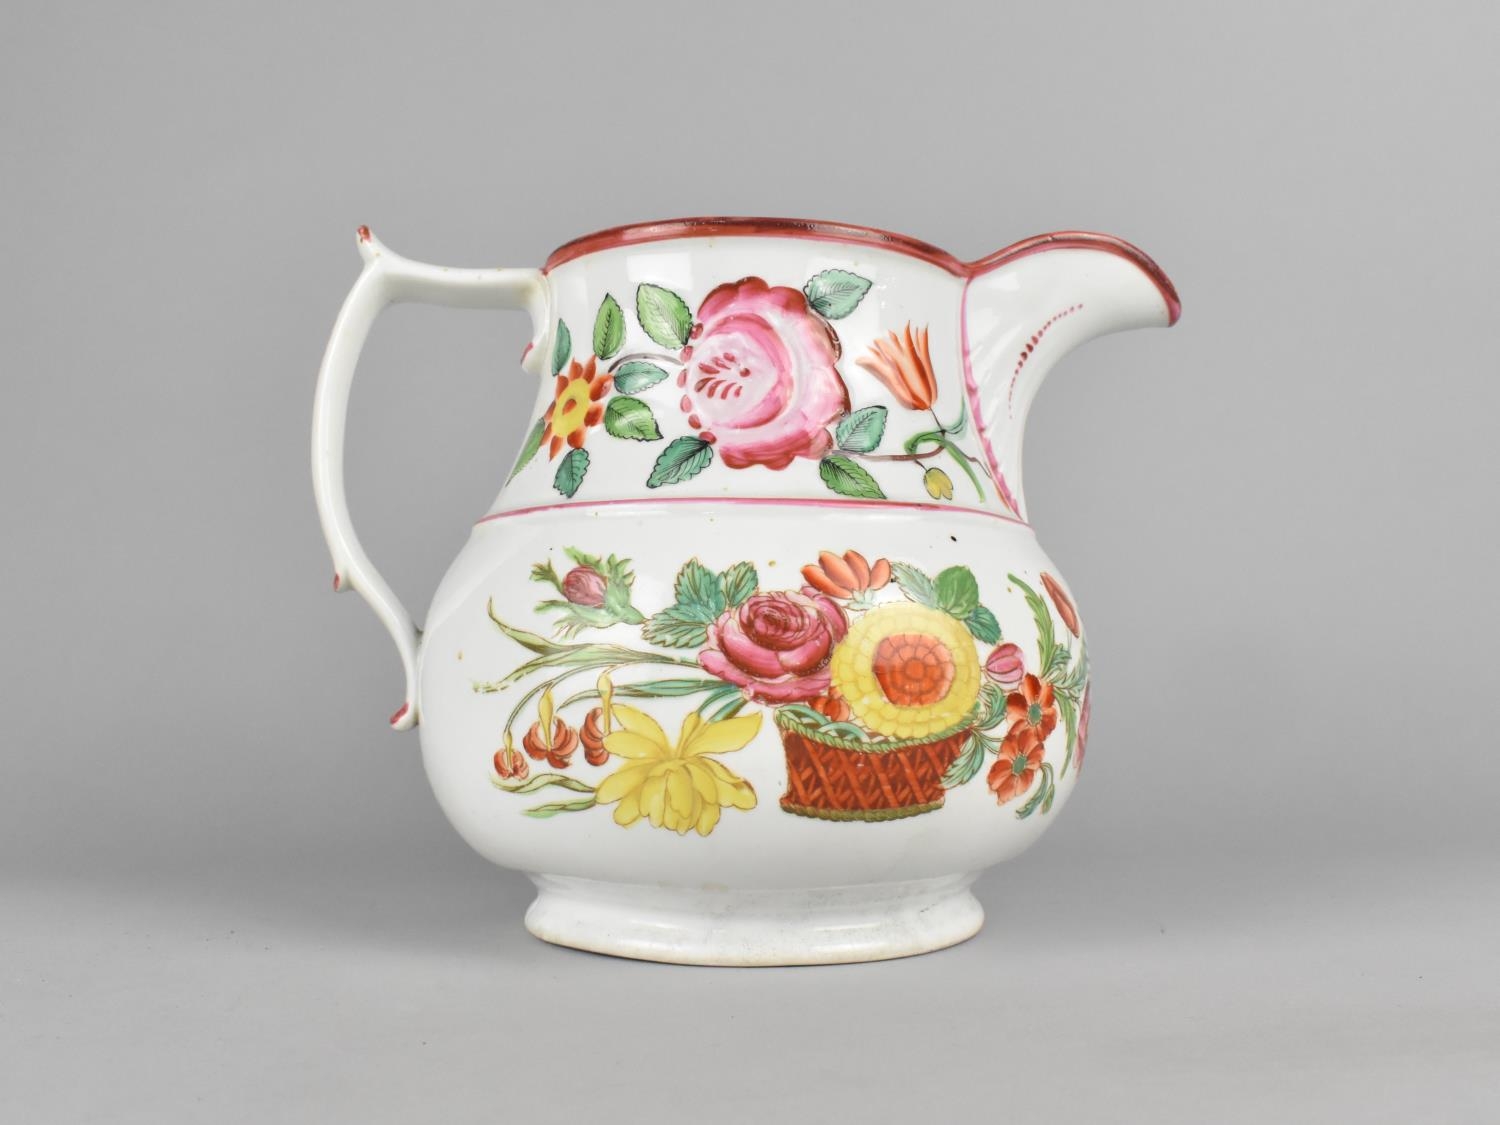 A 19th Century English Pottery Jug Hand Painted with Basket of Flowers Decoration, 18.5cm high (Some